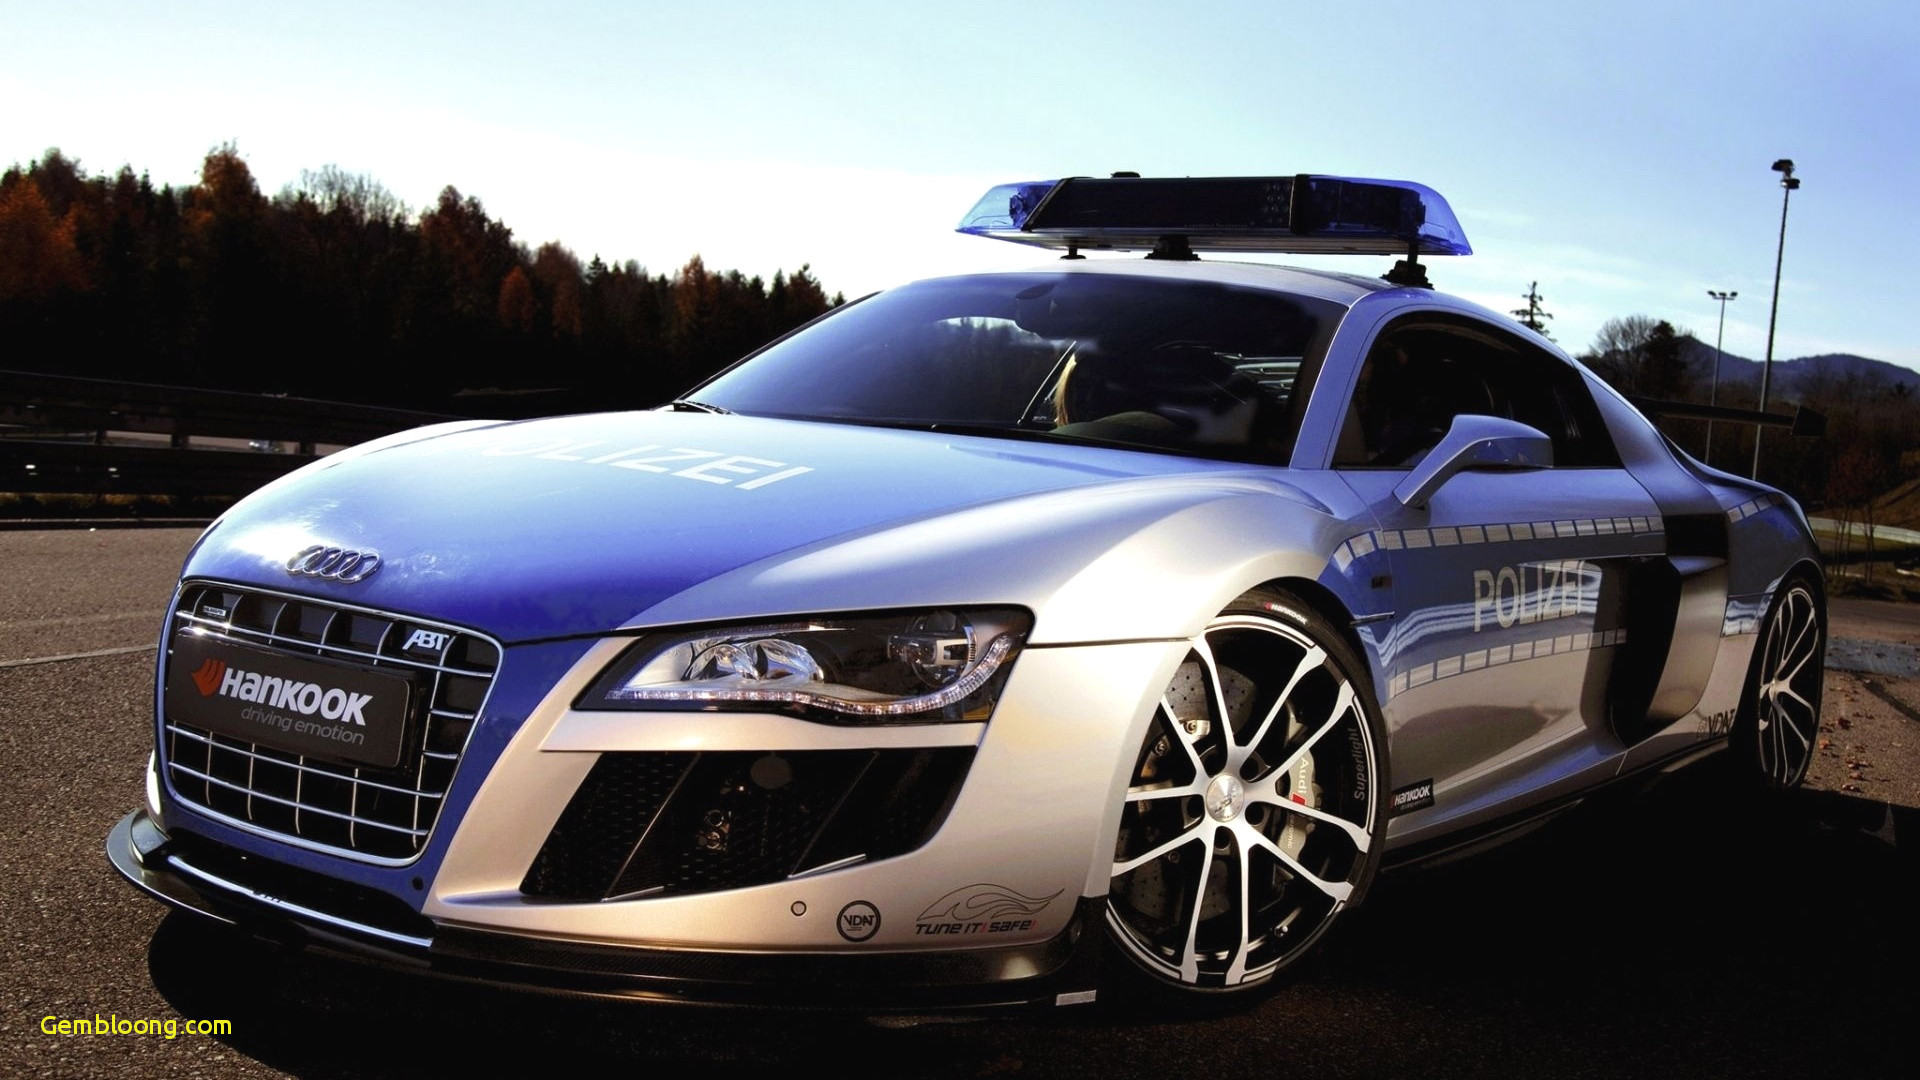 1920x1080 Cool Fast Cars Wallpapers Awesome Audi Cop Car Modified Sports Car Hd  Wallpaper – Hd Wallpapers